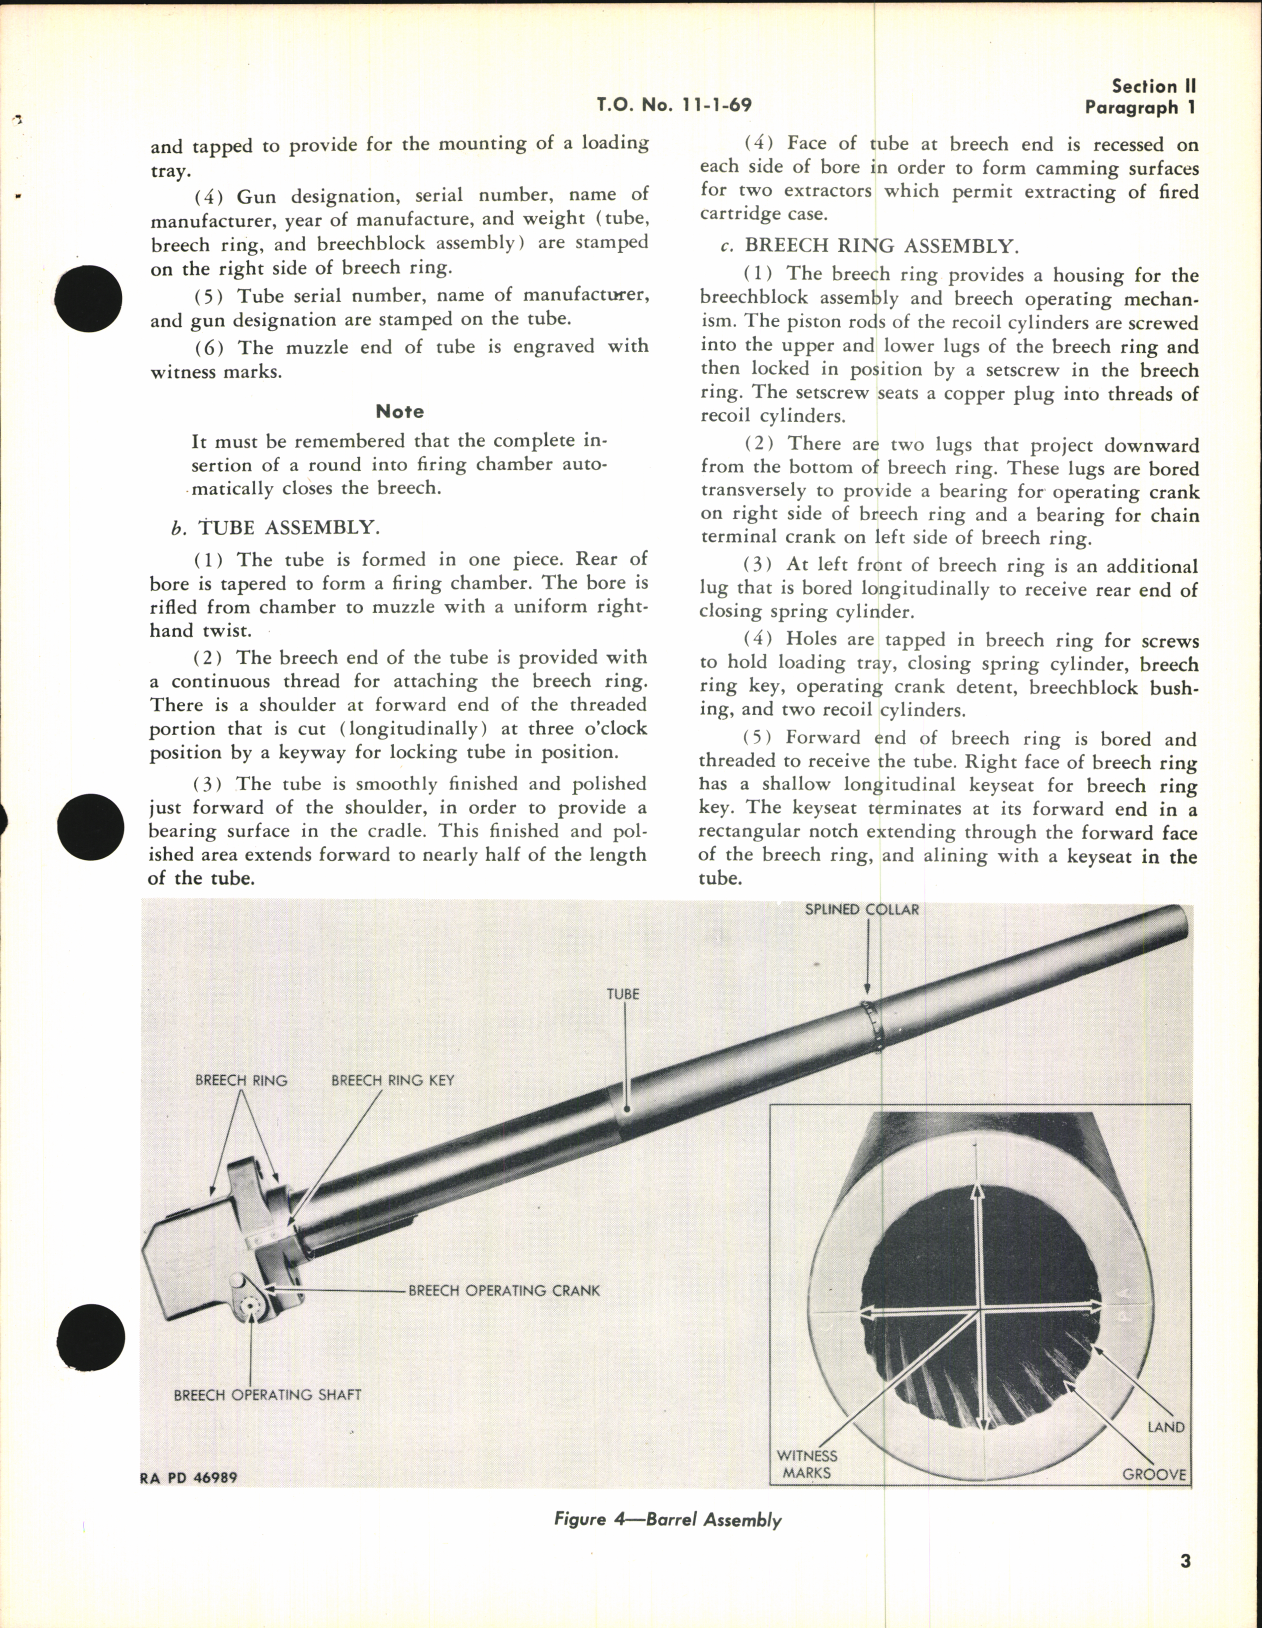 Sample page 7 from AirCorps Library document: Handbook of Instructions with Parts Catalog for 75-MM Aircraft Gun M-4 and Gun Mount M6